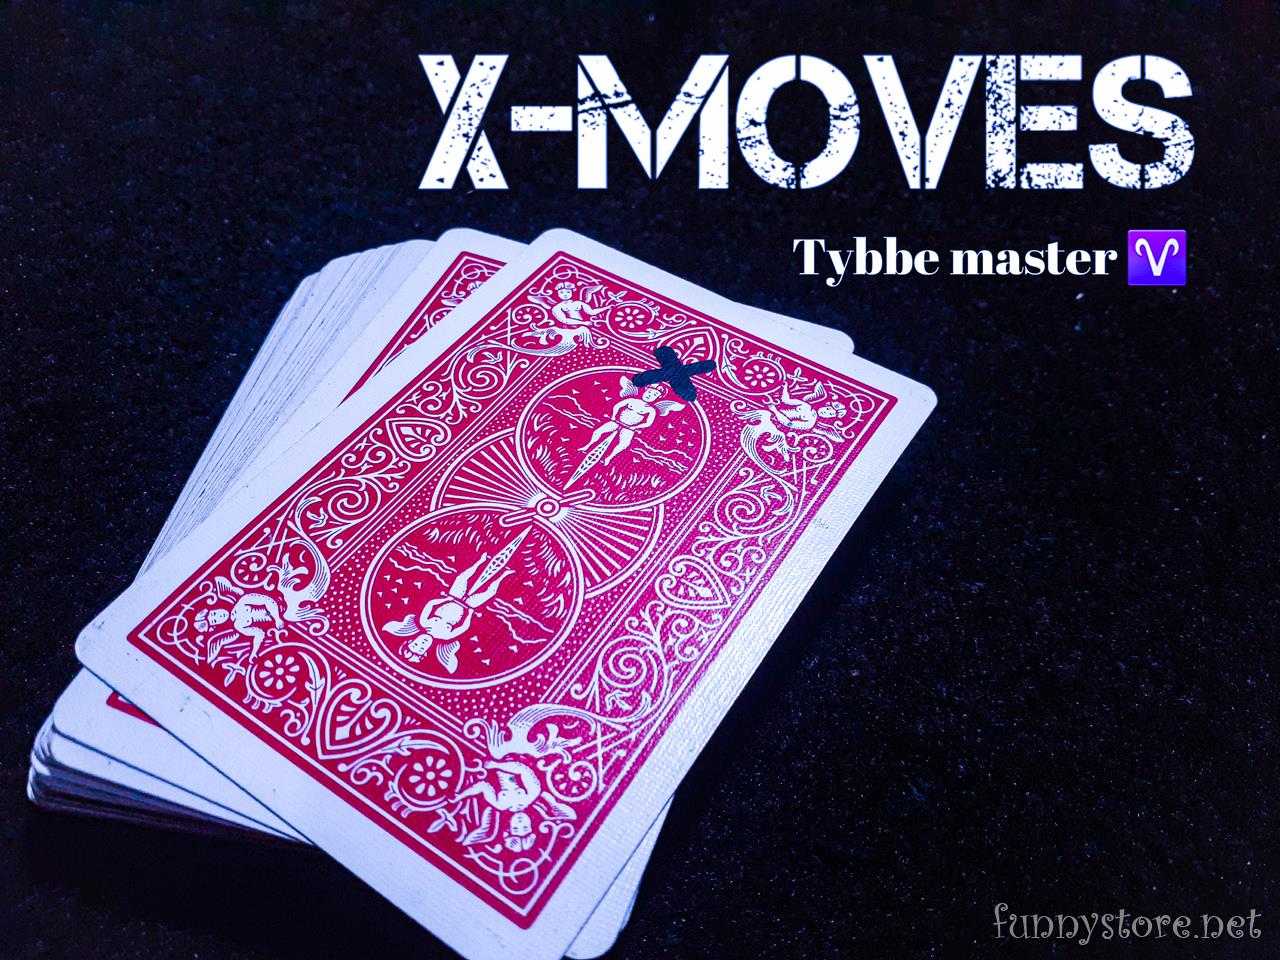 Tybbe master - X moves